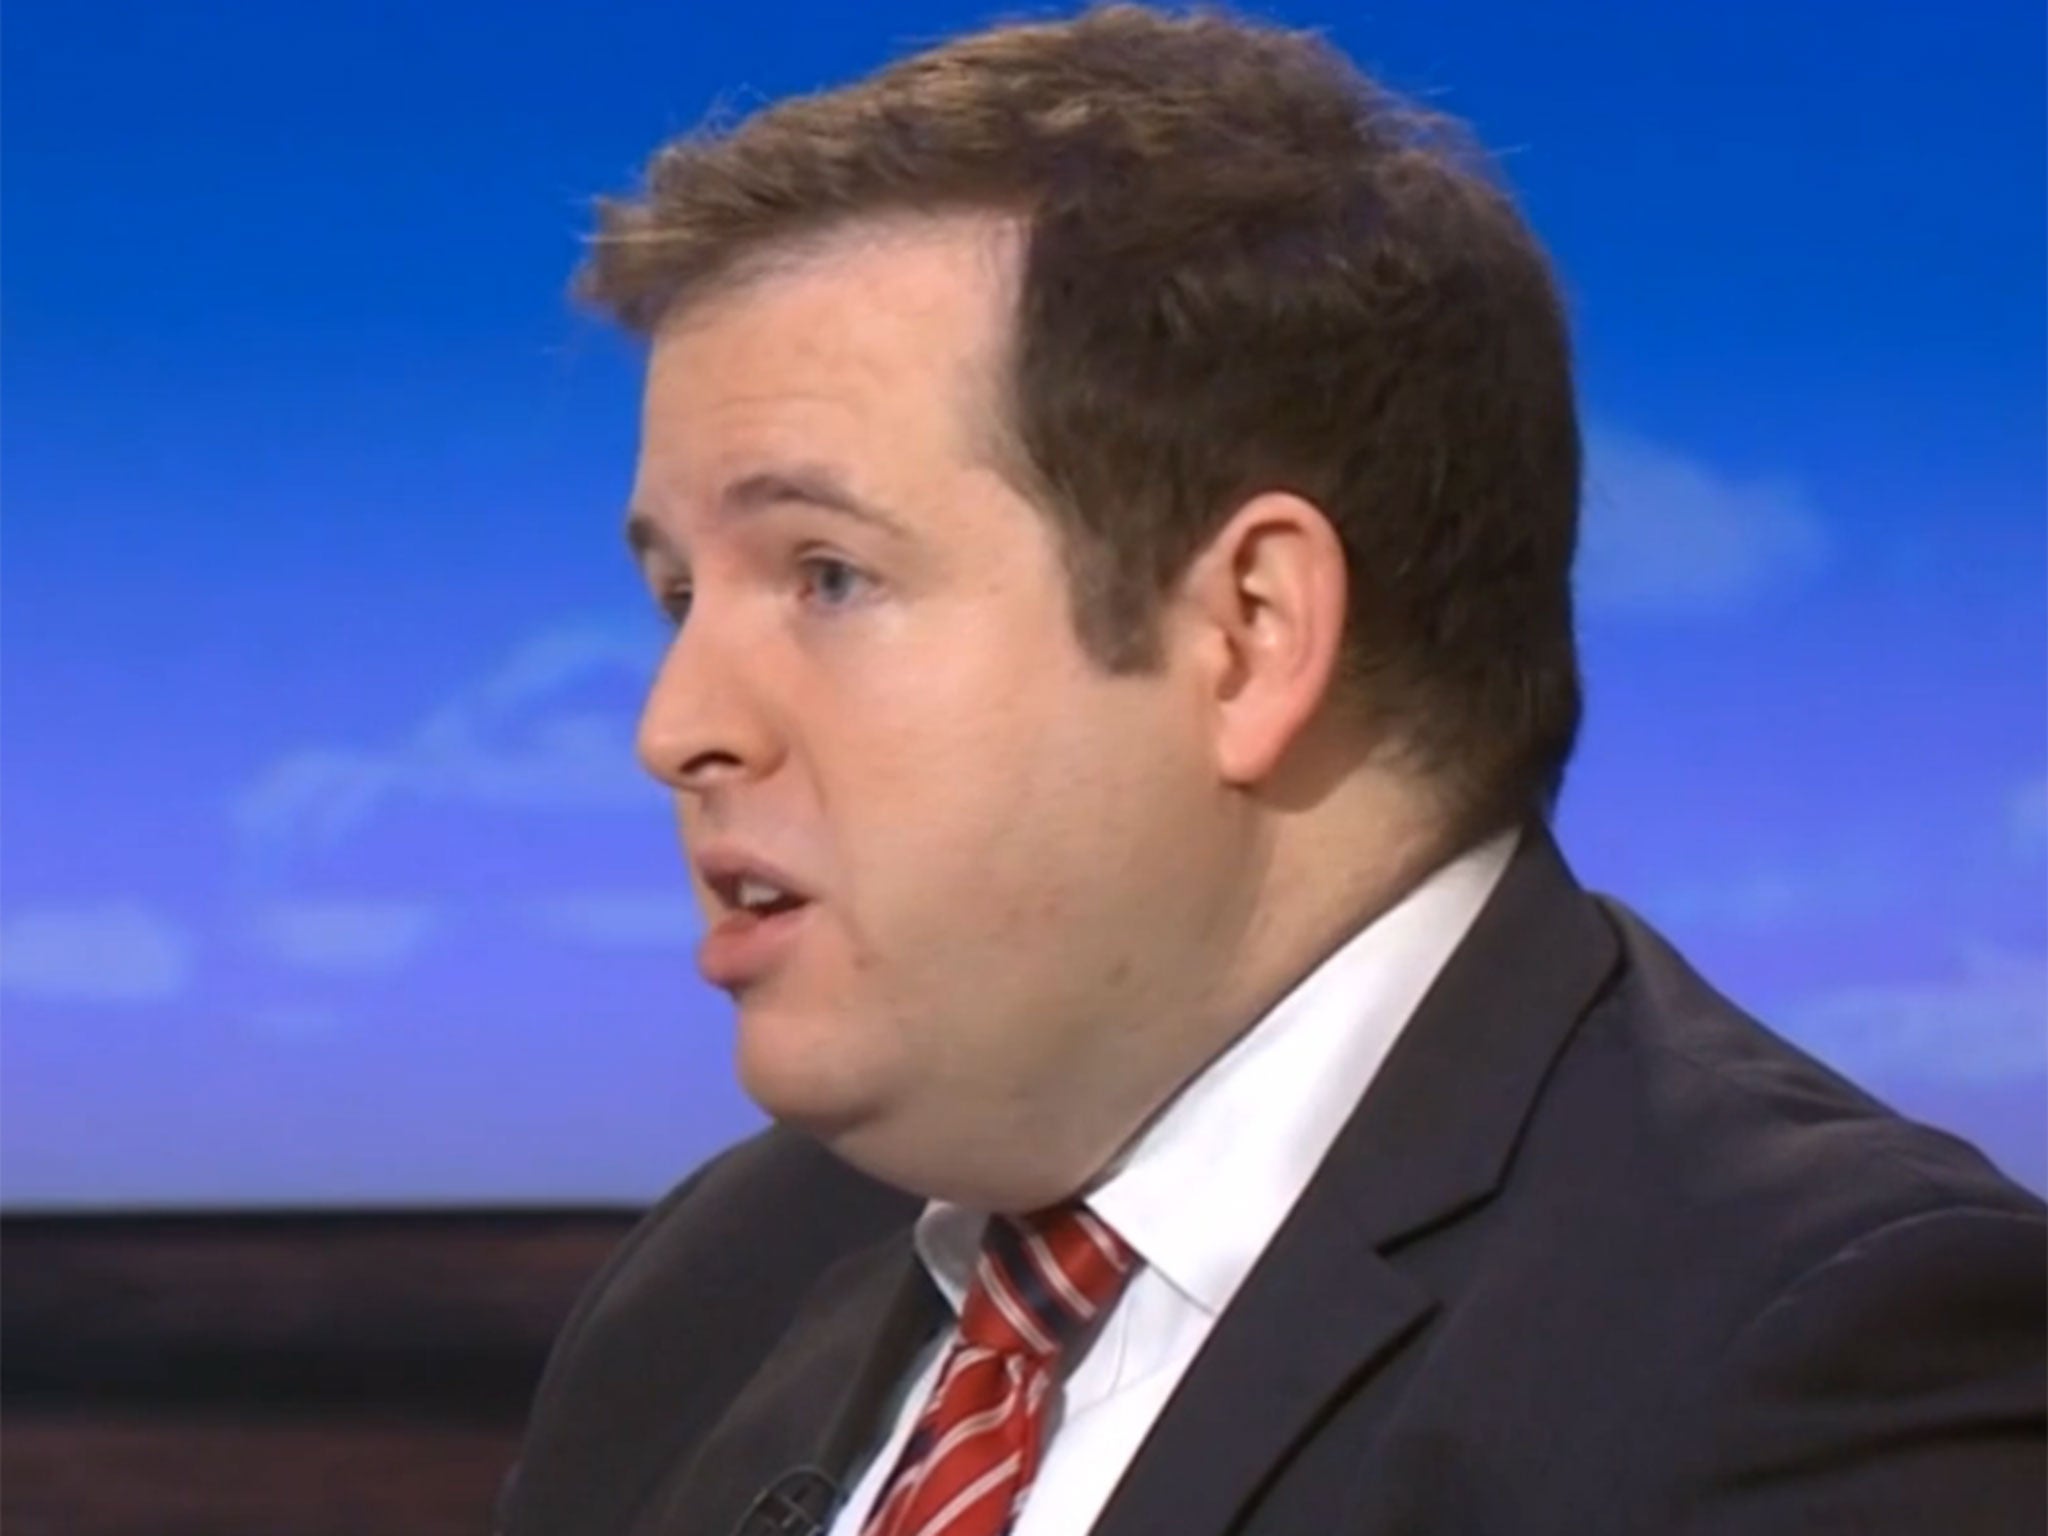 Stephen Doughty announced his intention to resign on BBC's Daily Politics following Pat McFadden's sacking